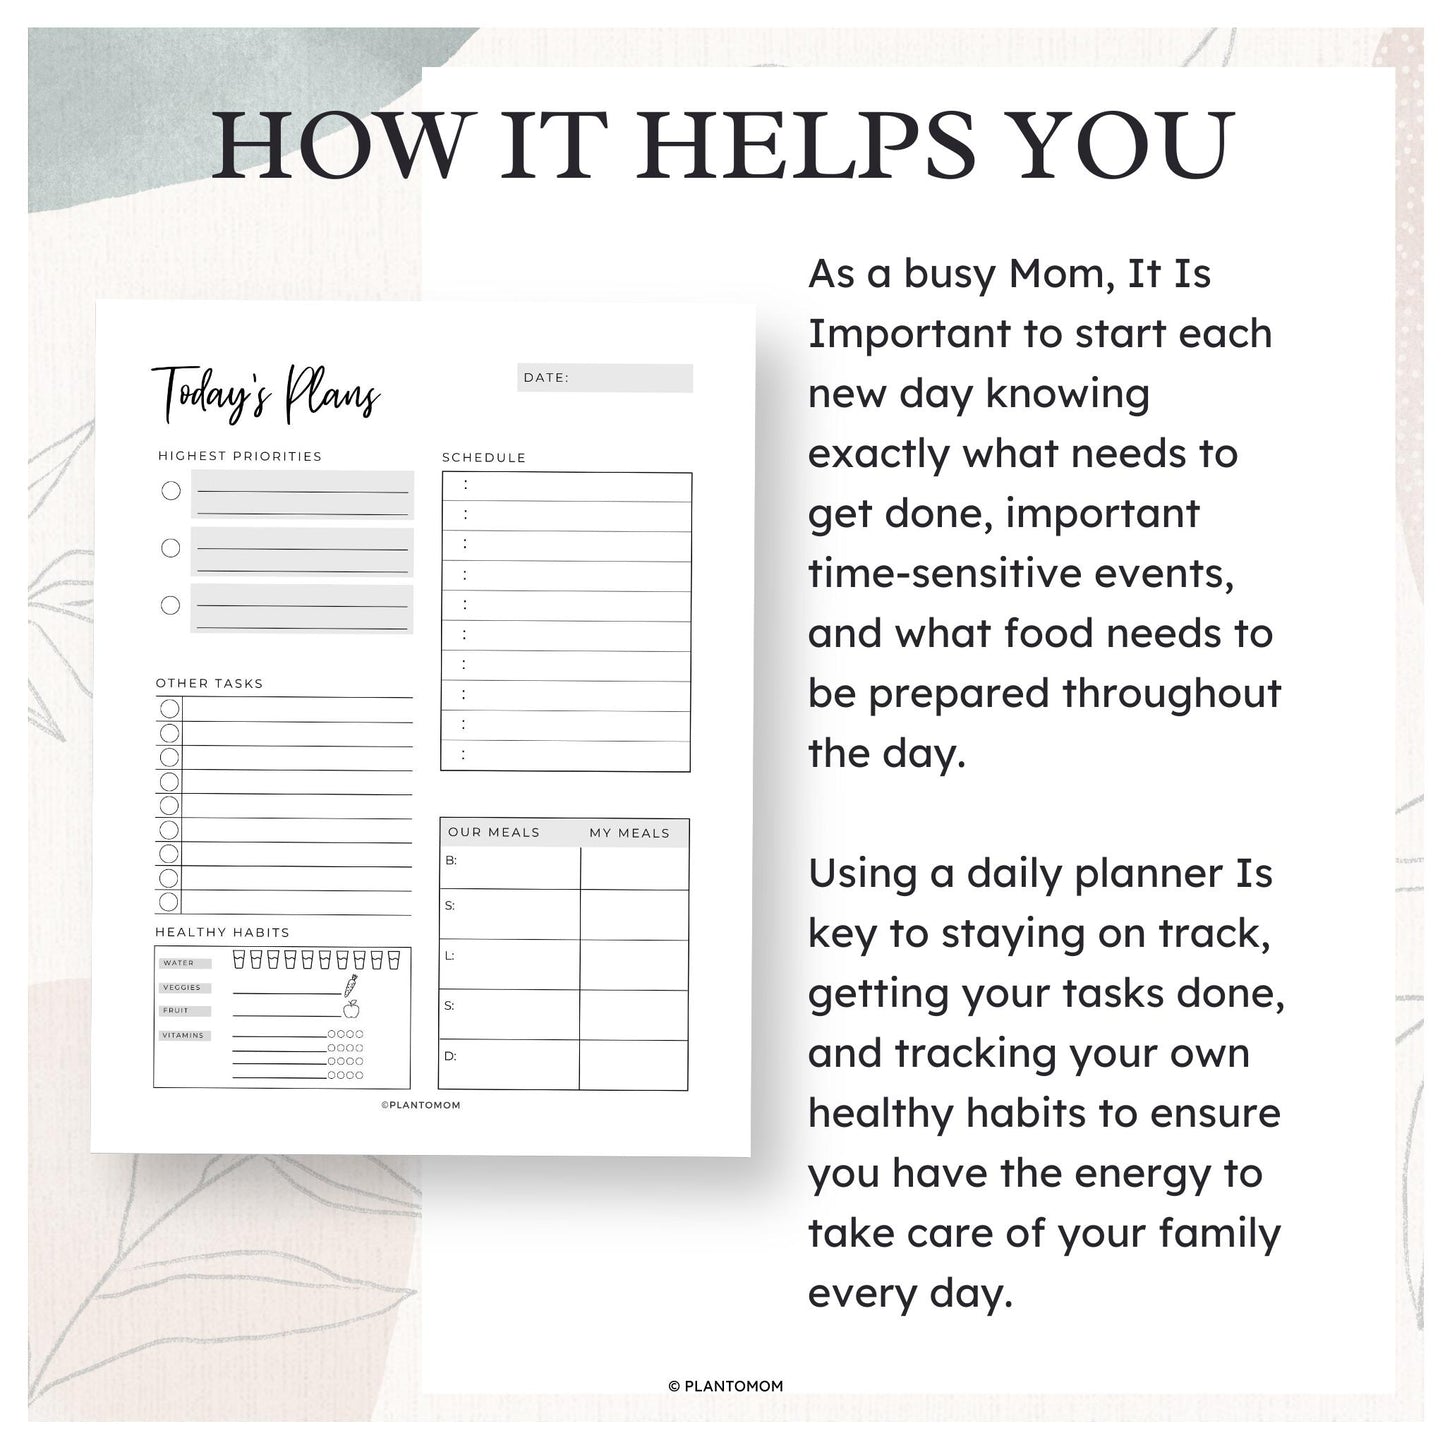 Today's Plans Layout #1A - Printable Daily Planner PDF